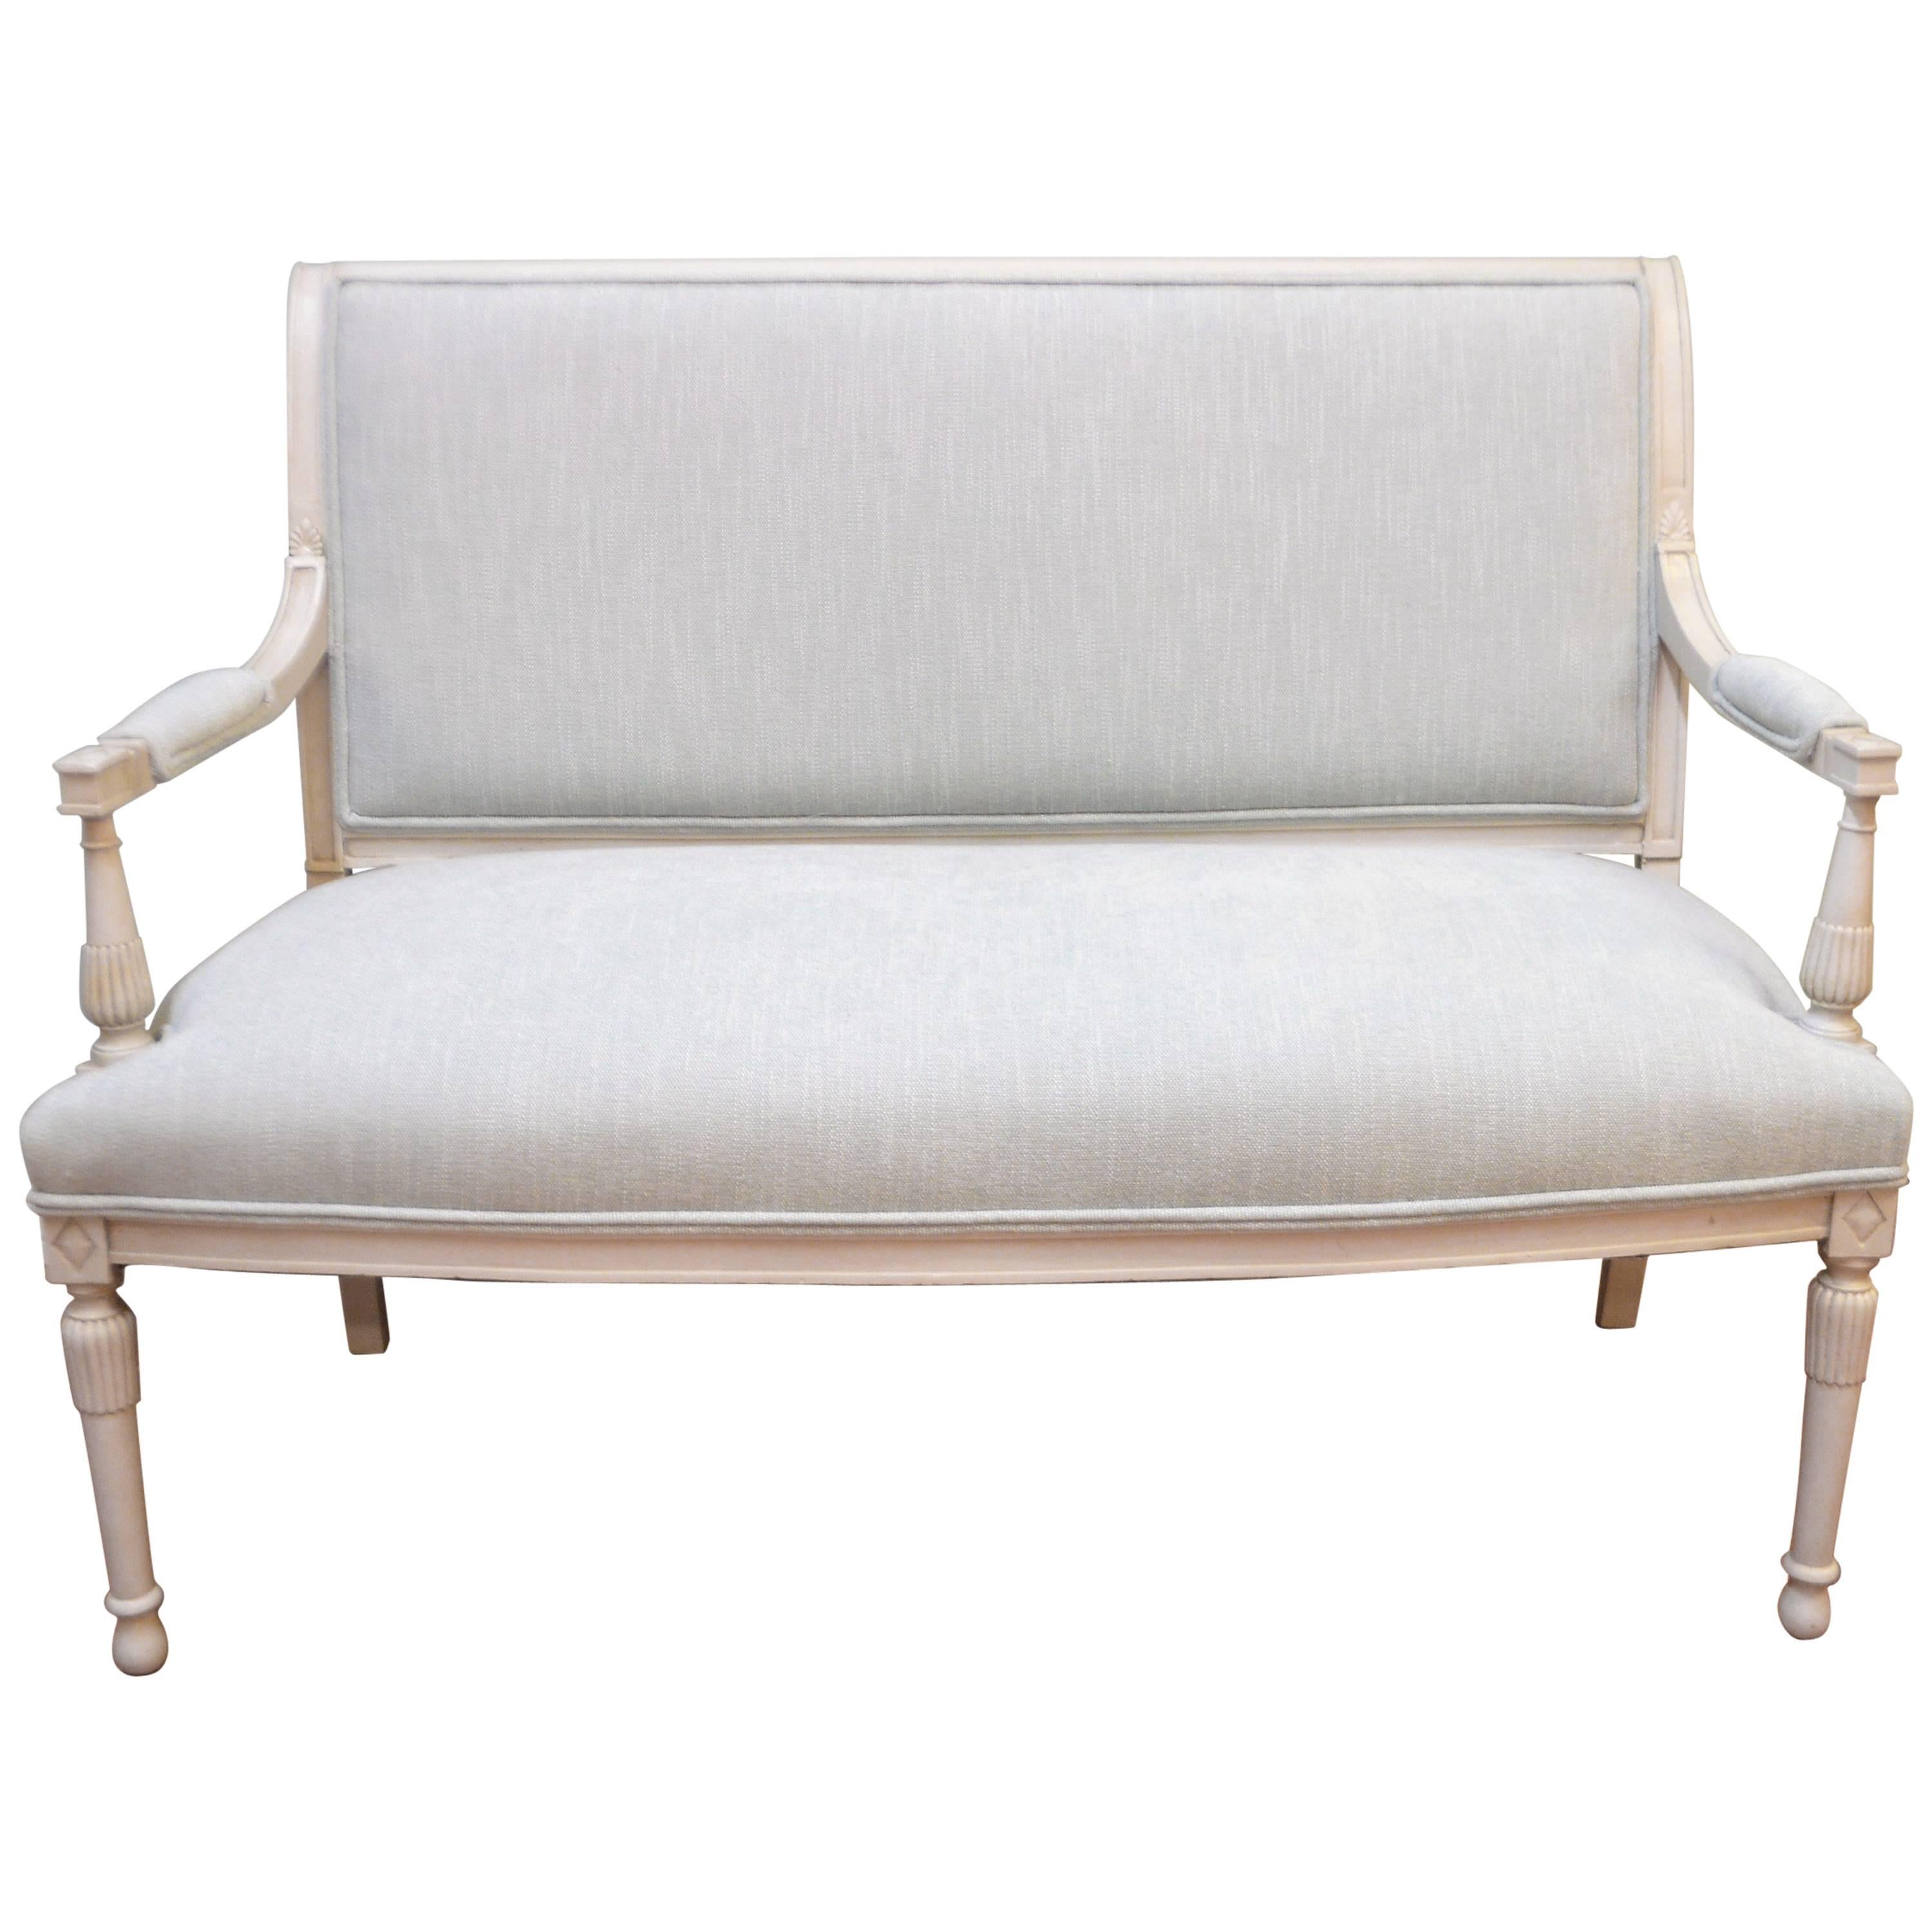 Gustavian Style Painted Settee, Canape, Newly Upholstered in a Light Blue Linen